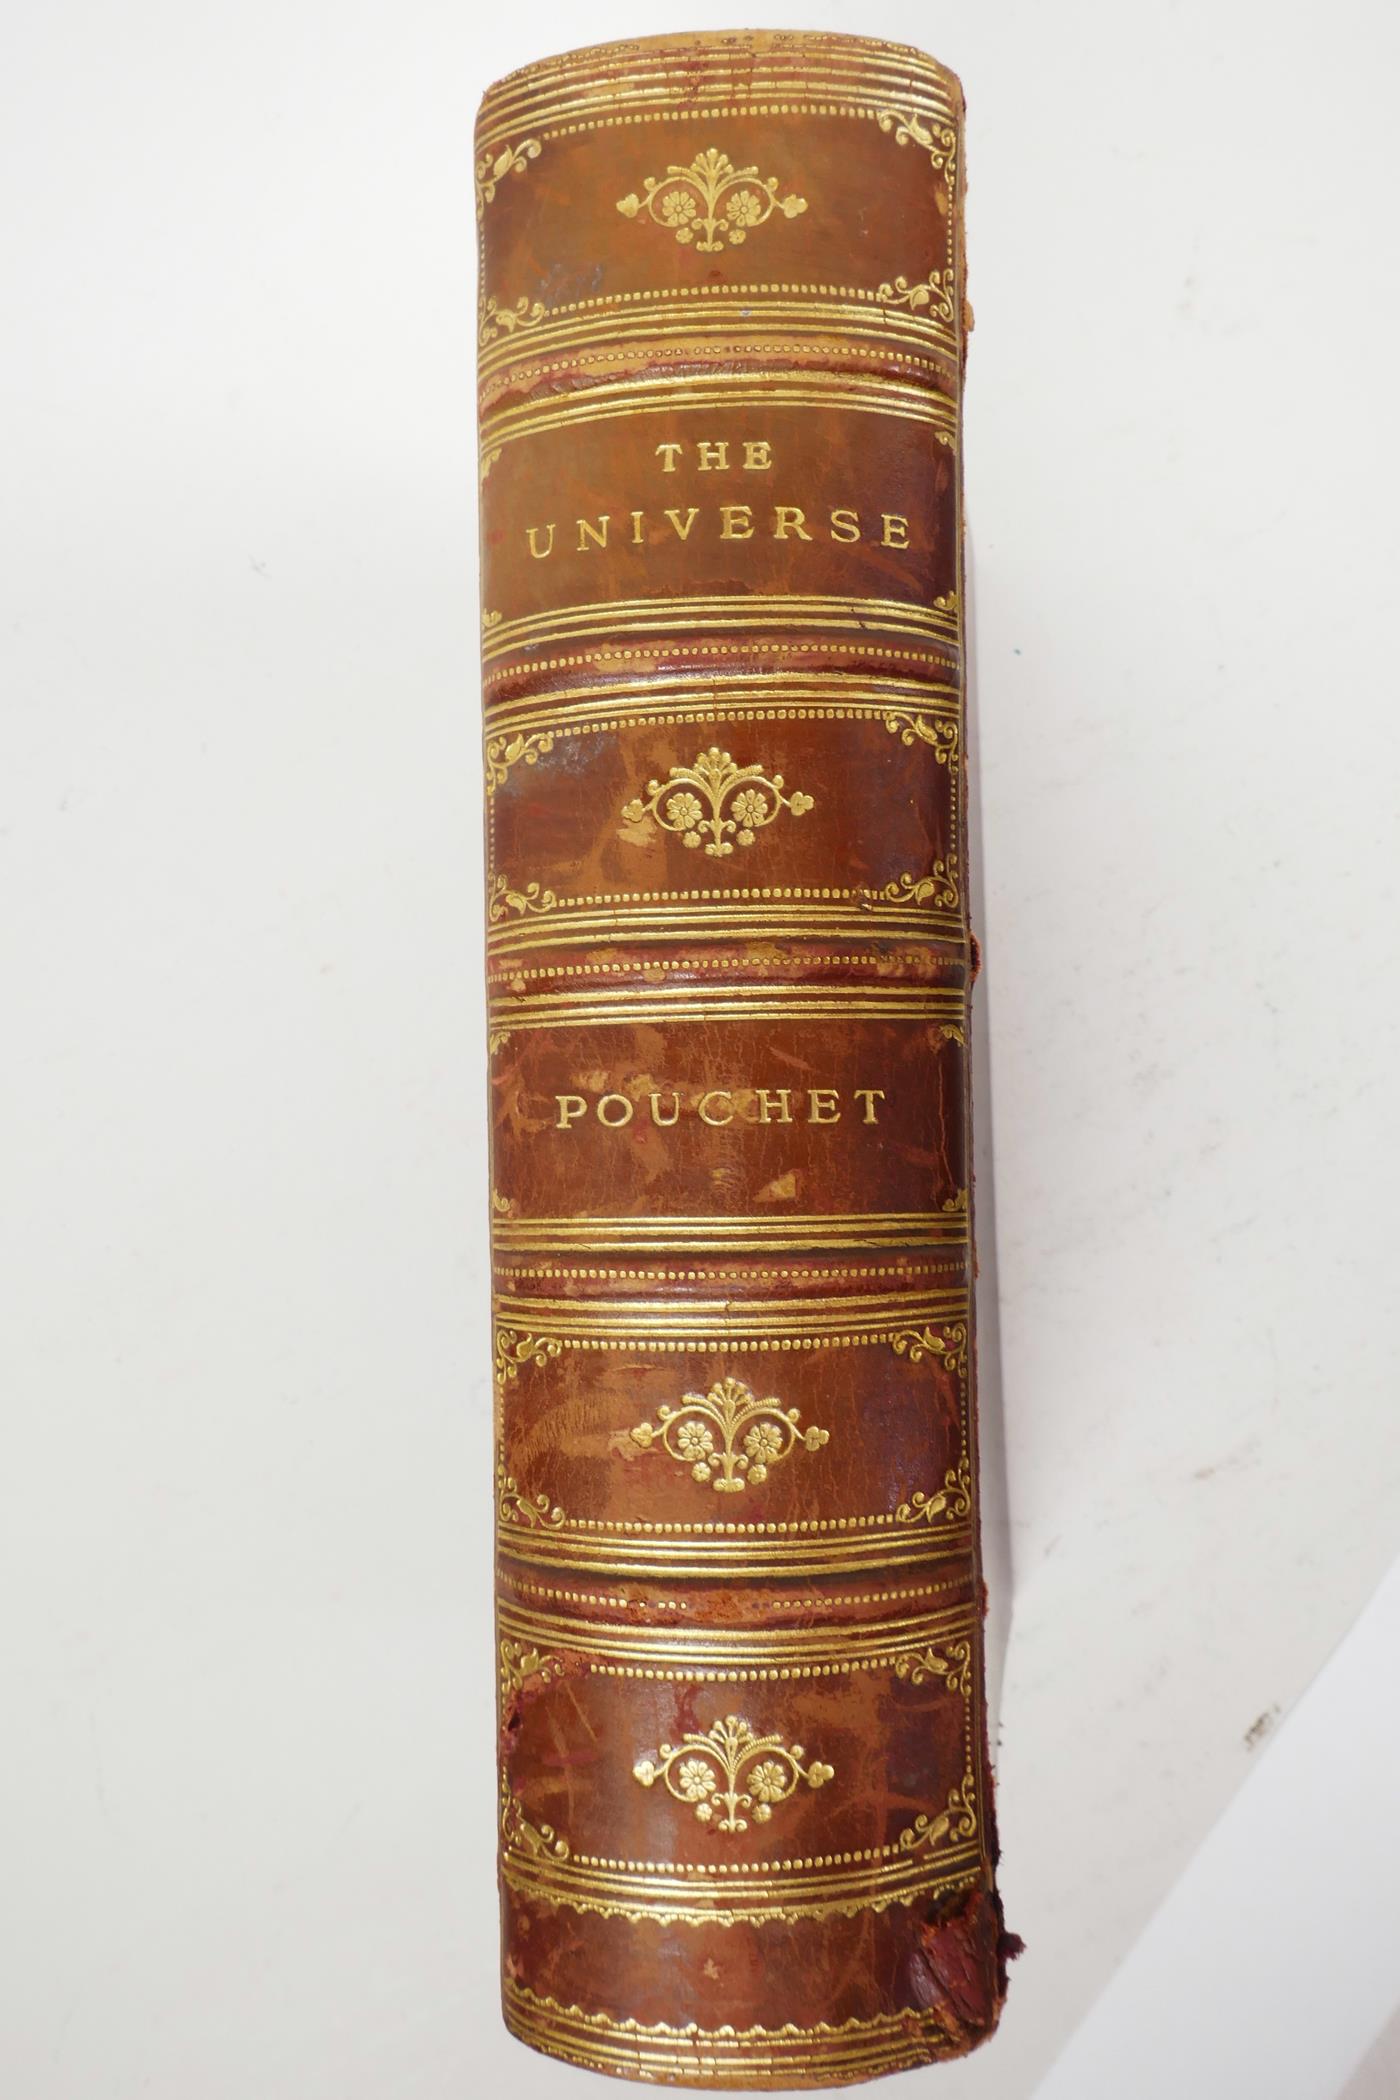 One volume 'The Universe' by F.A. Pouchet, published by Blackie & Sons Ltd, bearing Ludlow Grammar